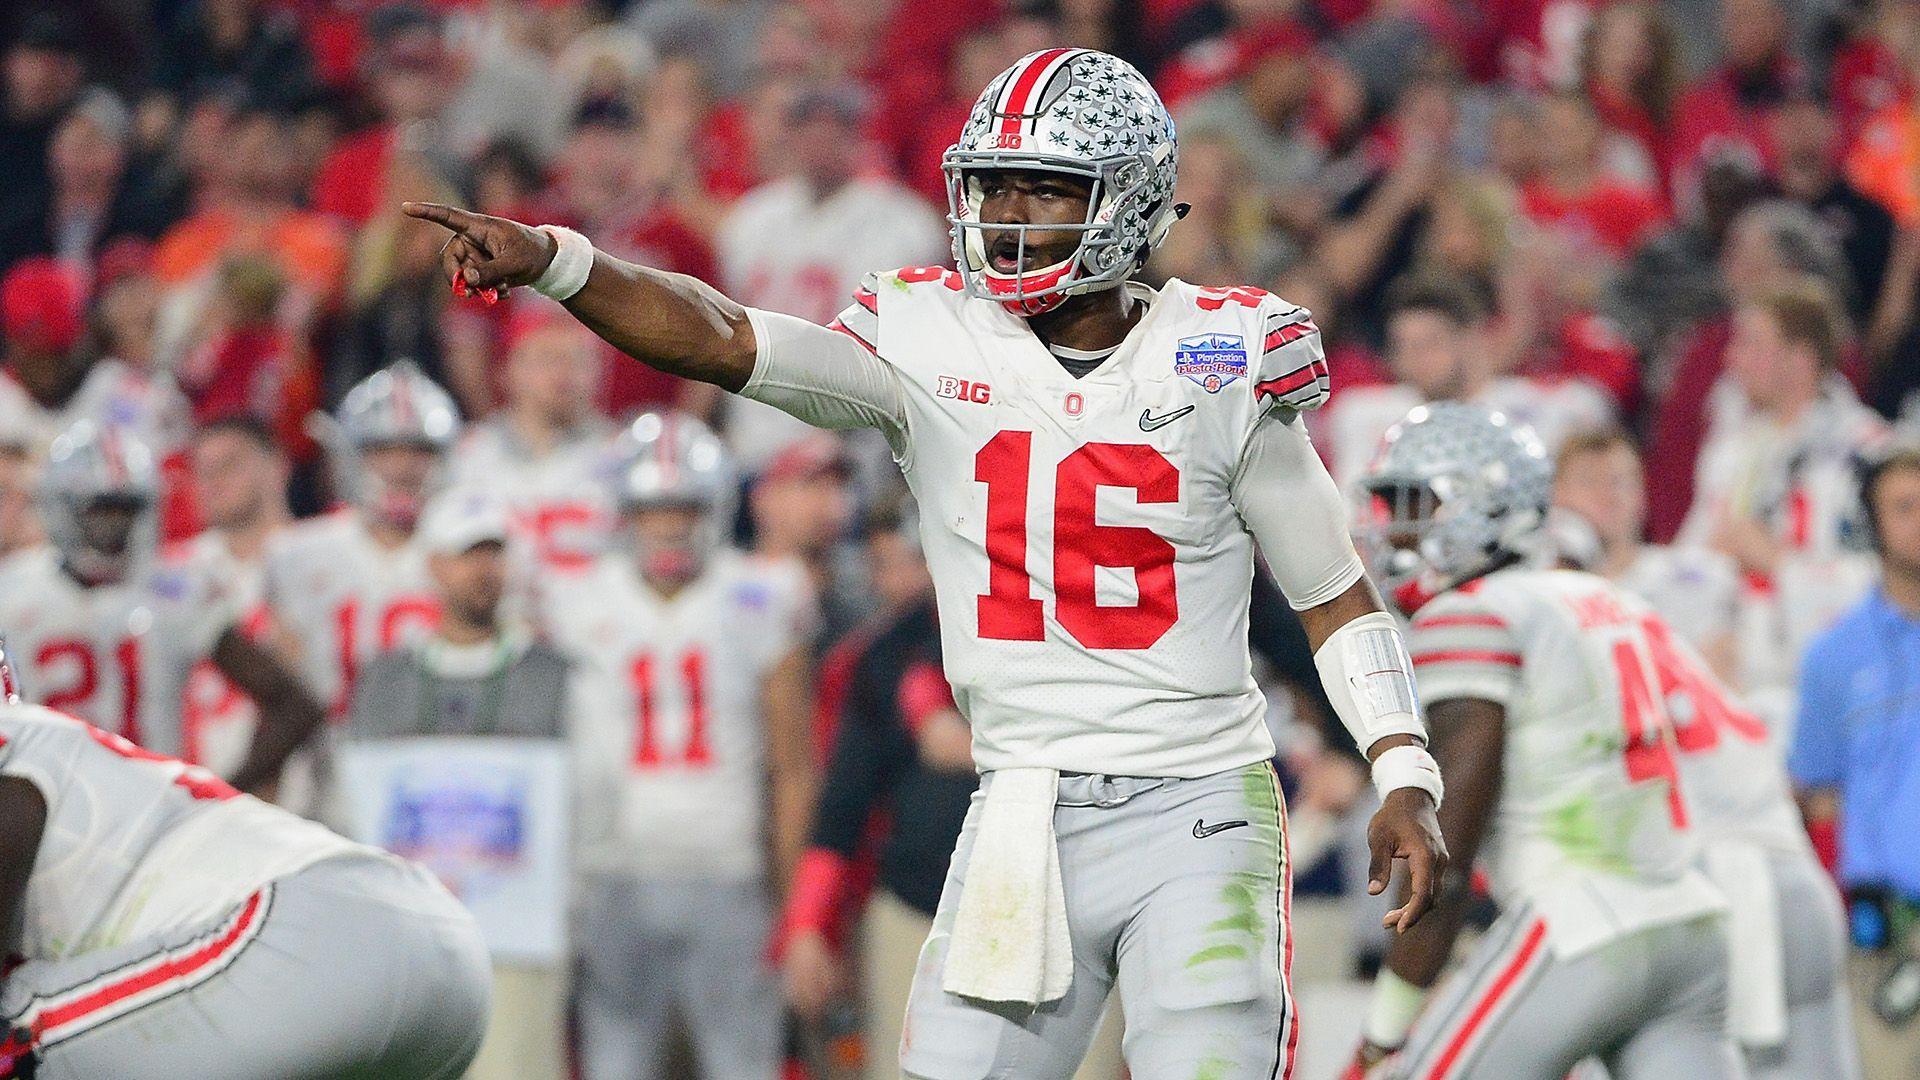 How will J.T. Barrett's up and down college career end?